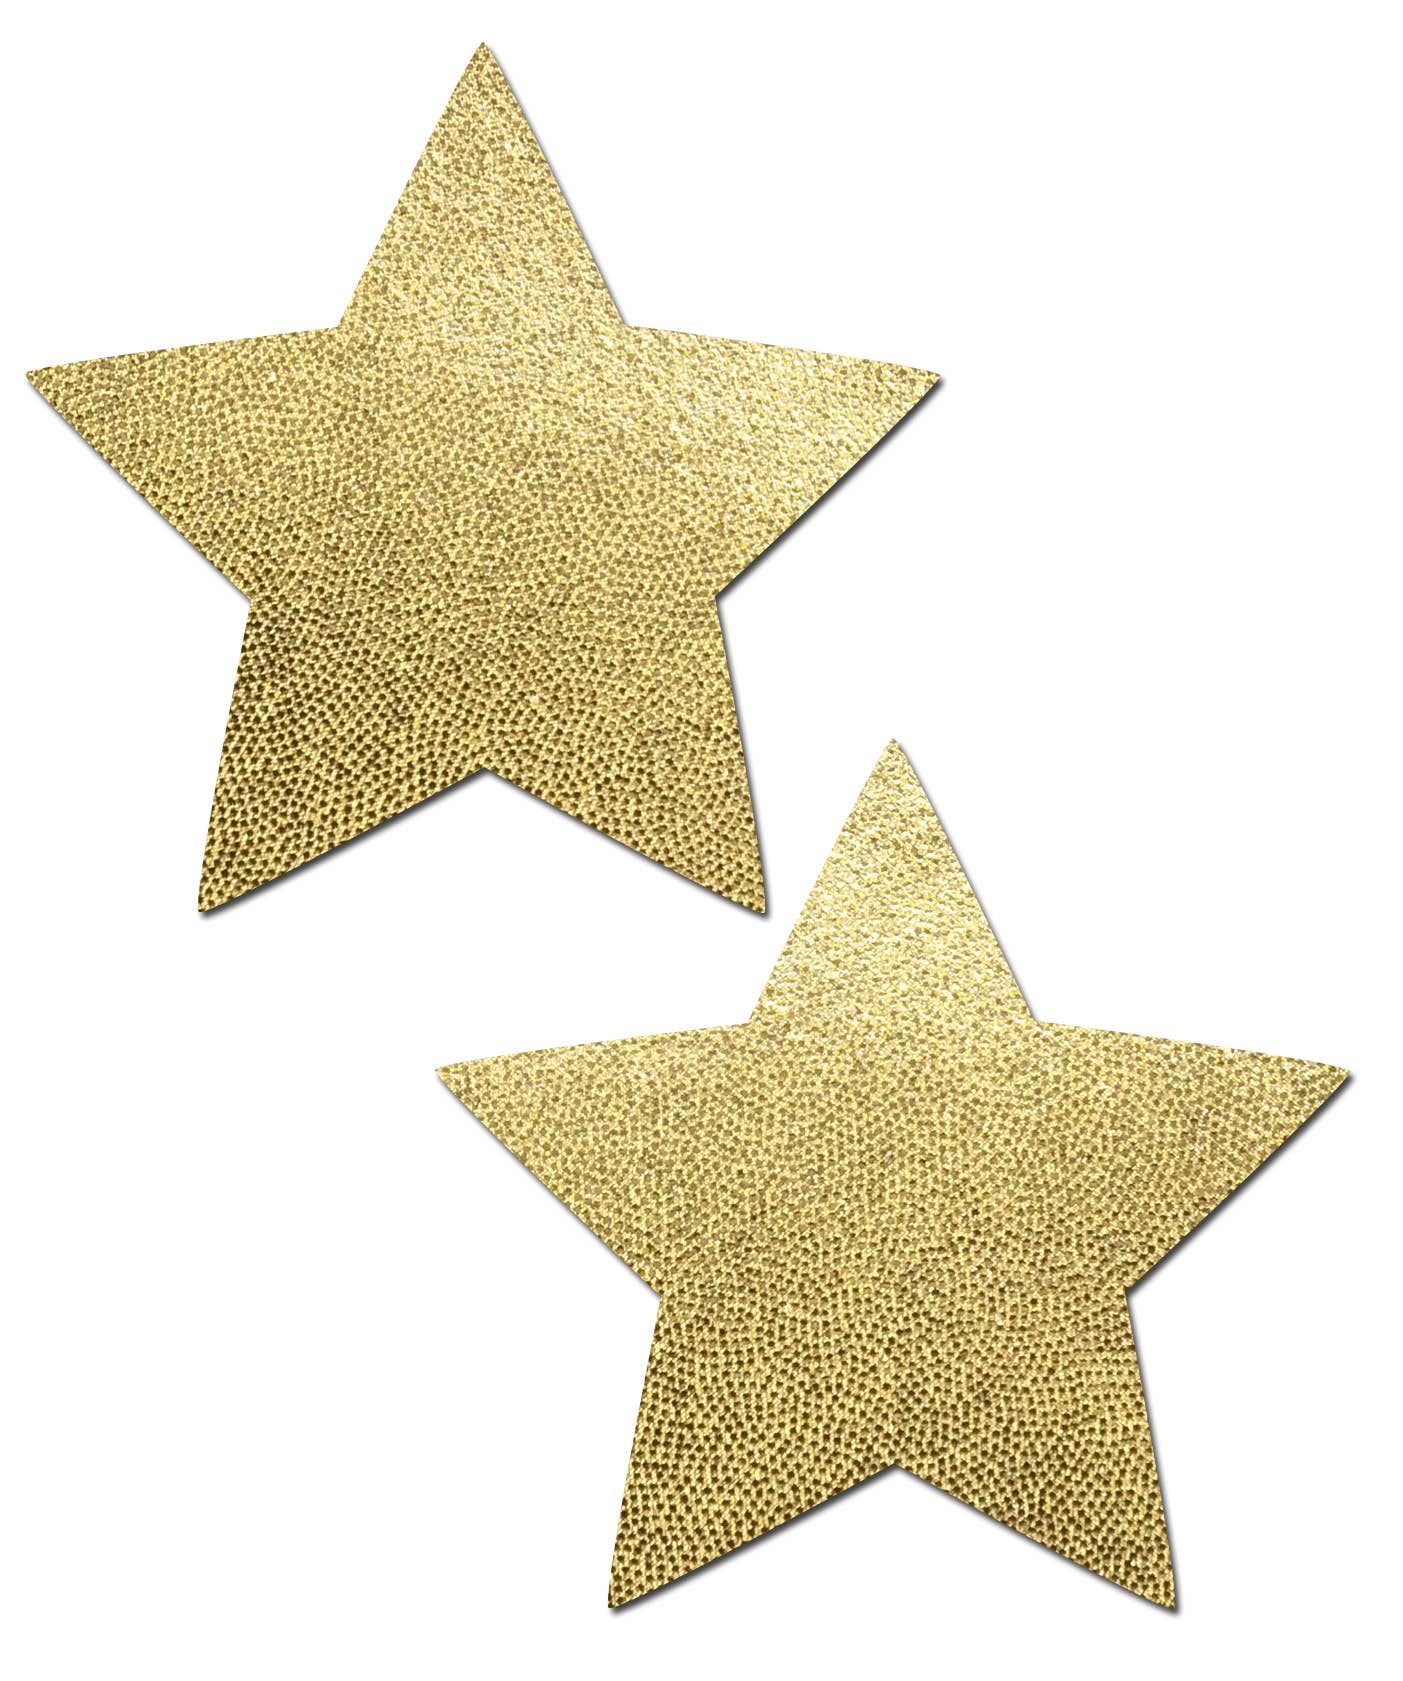 Star: Liquid Gold Star Nipple Pasties by Pastease®